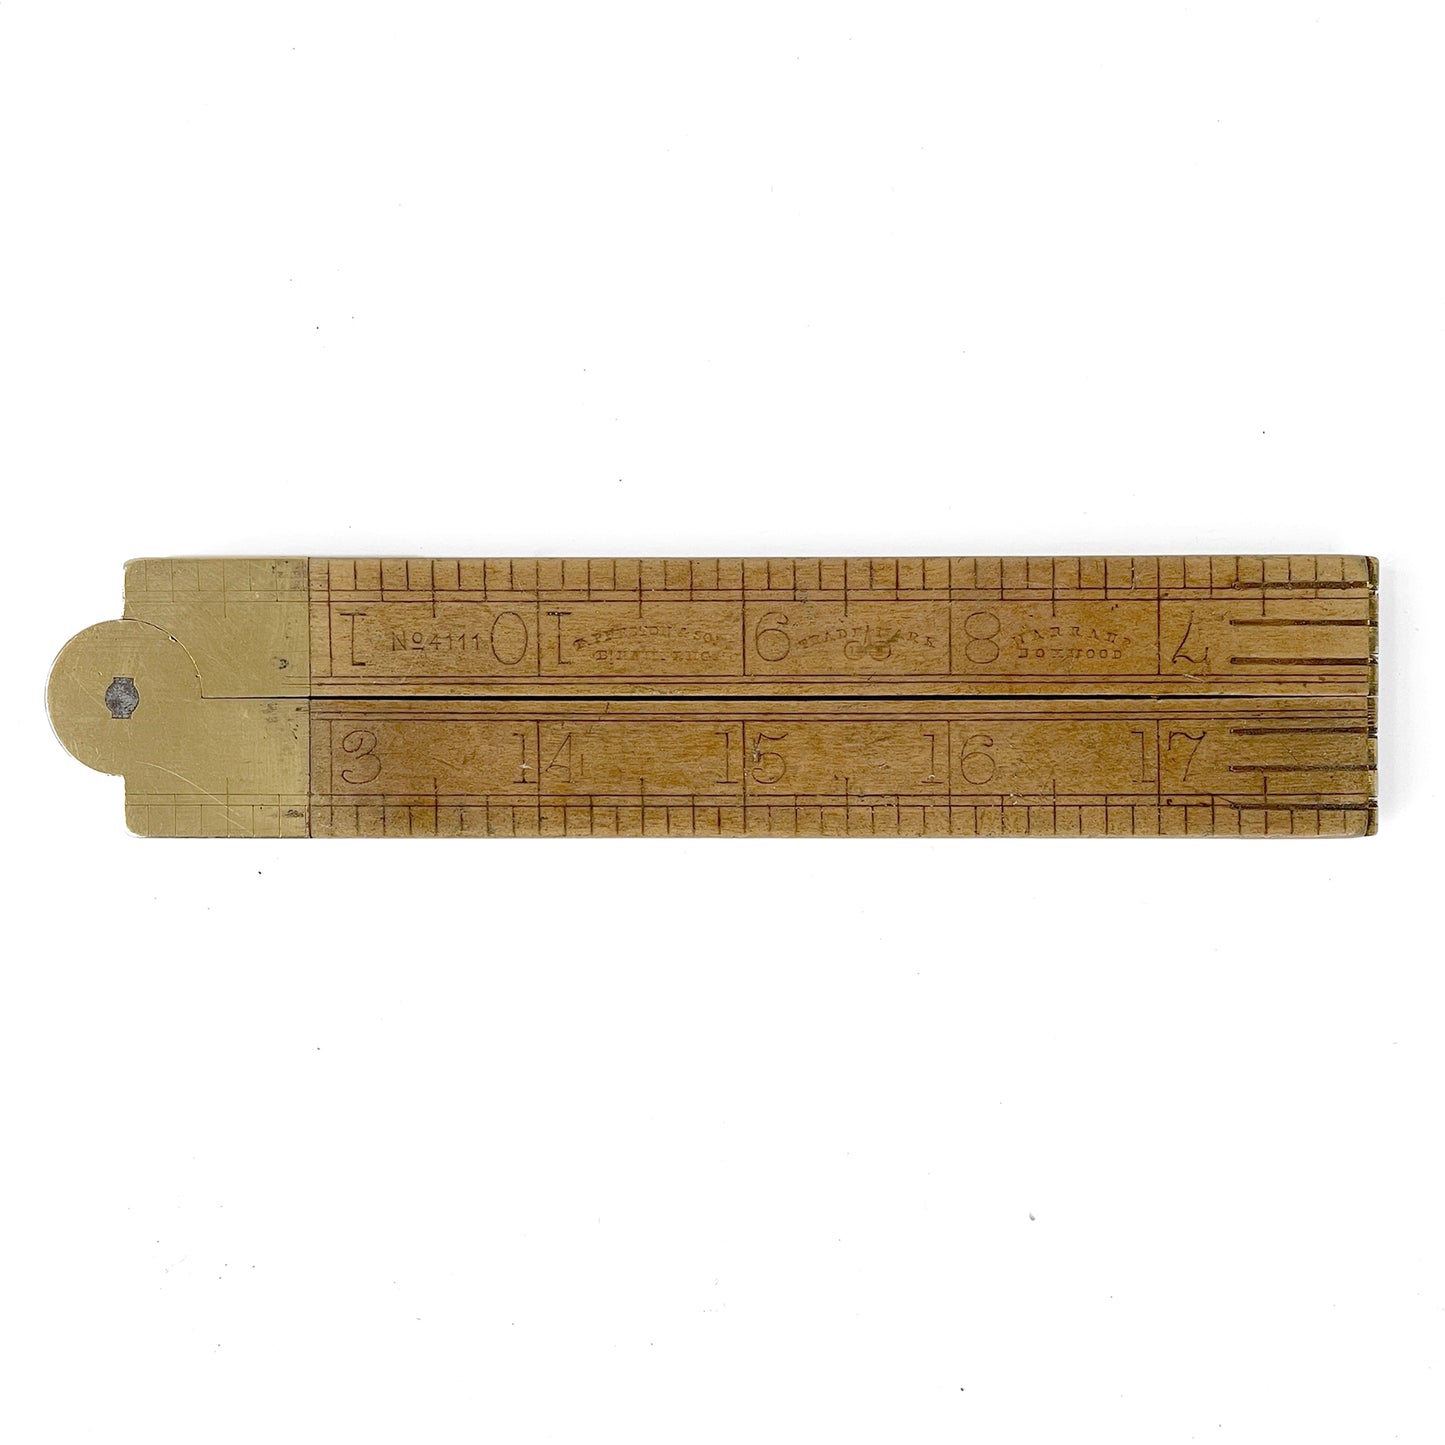 Early 20th Century Two-Foot Folding Ruler